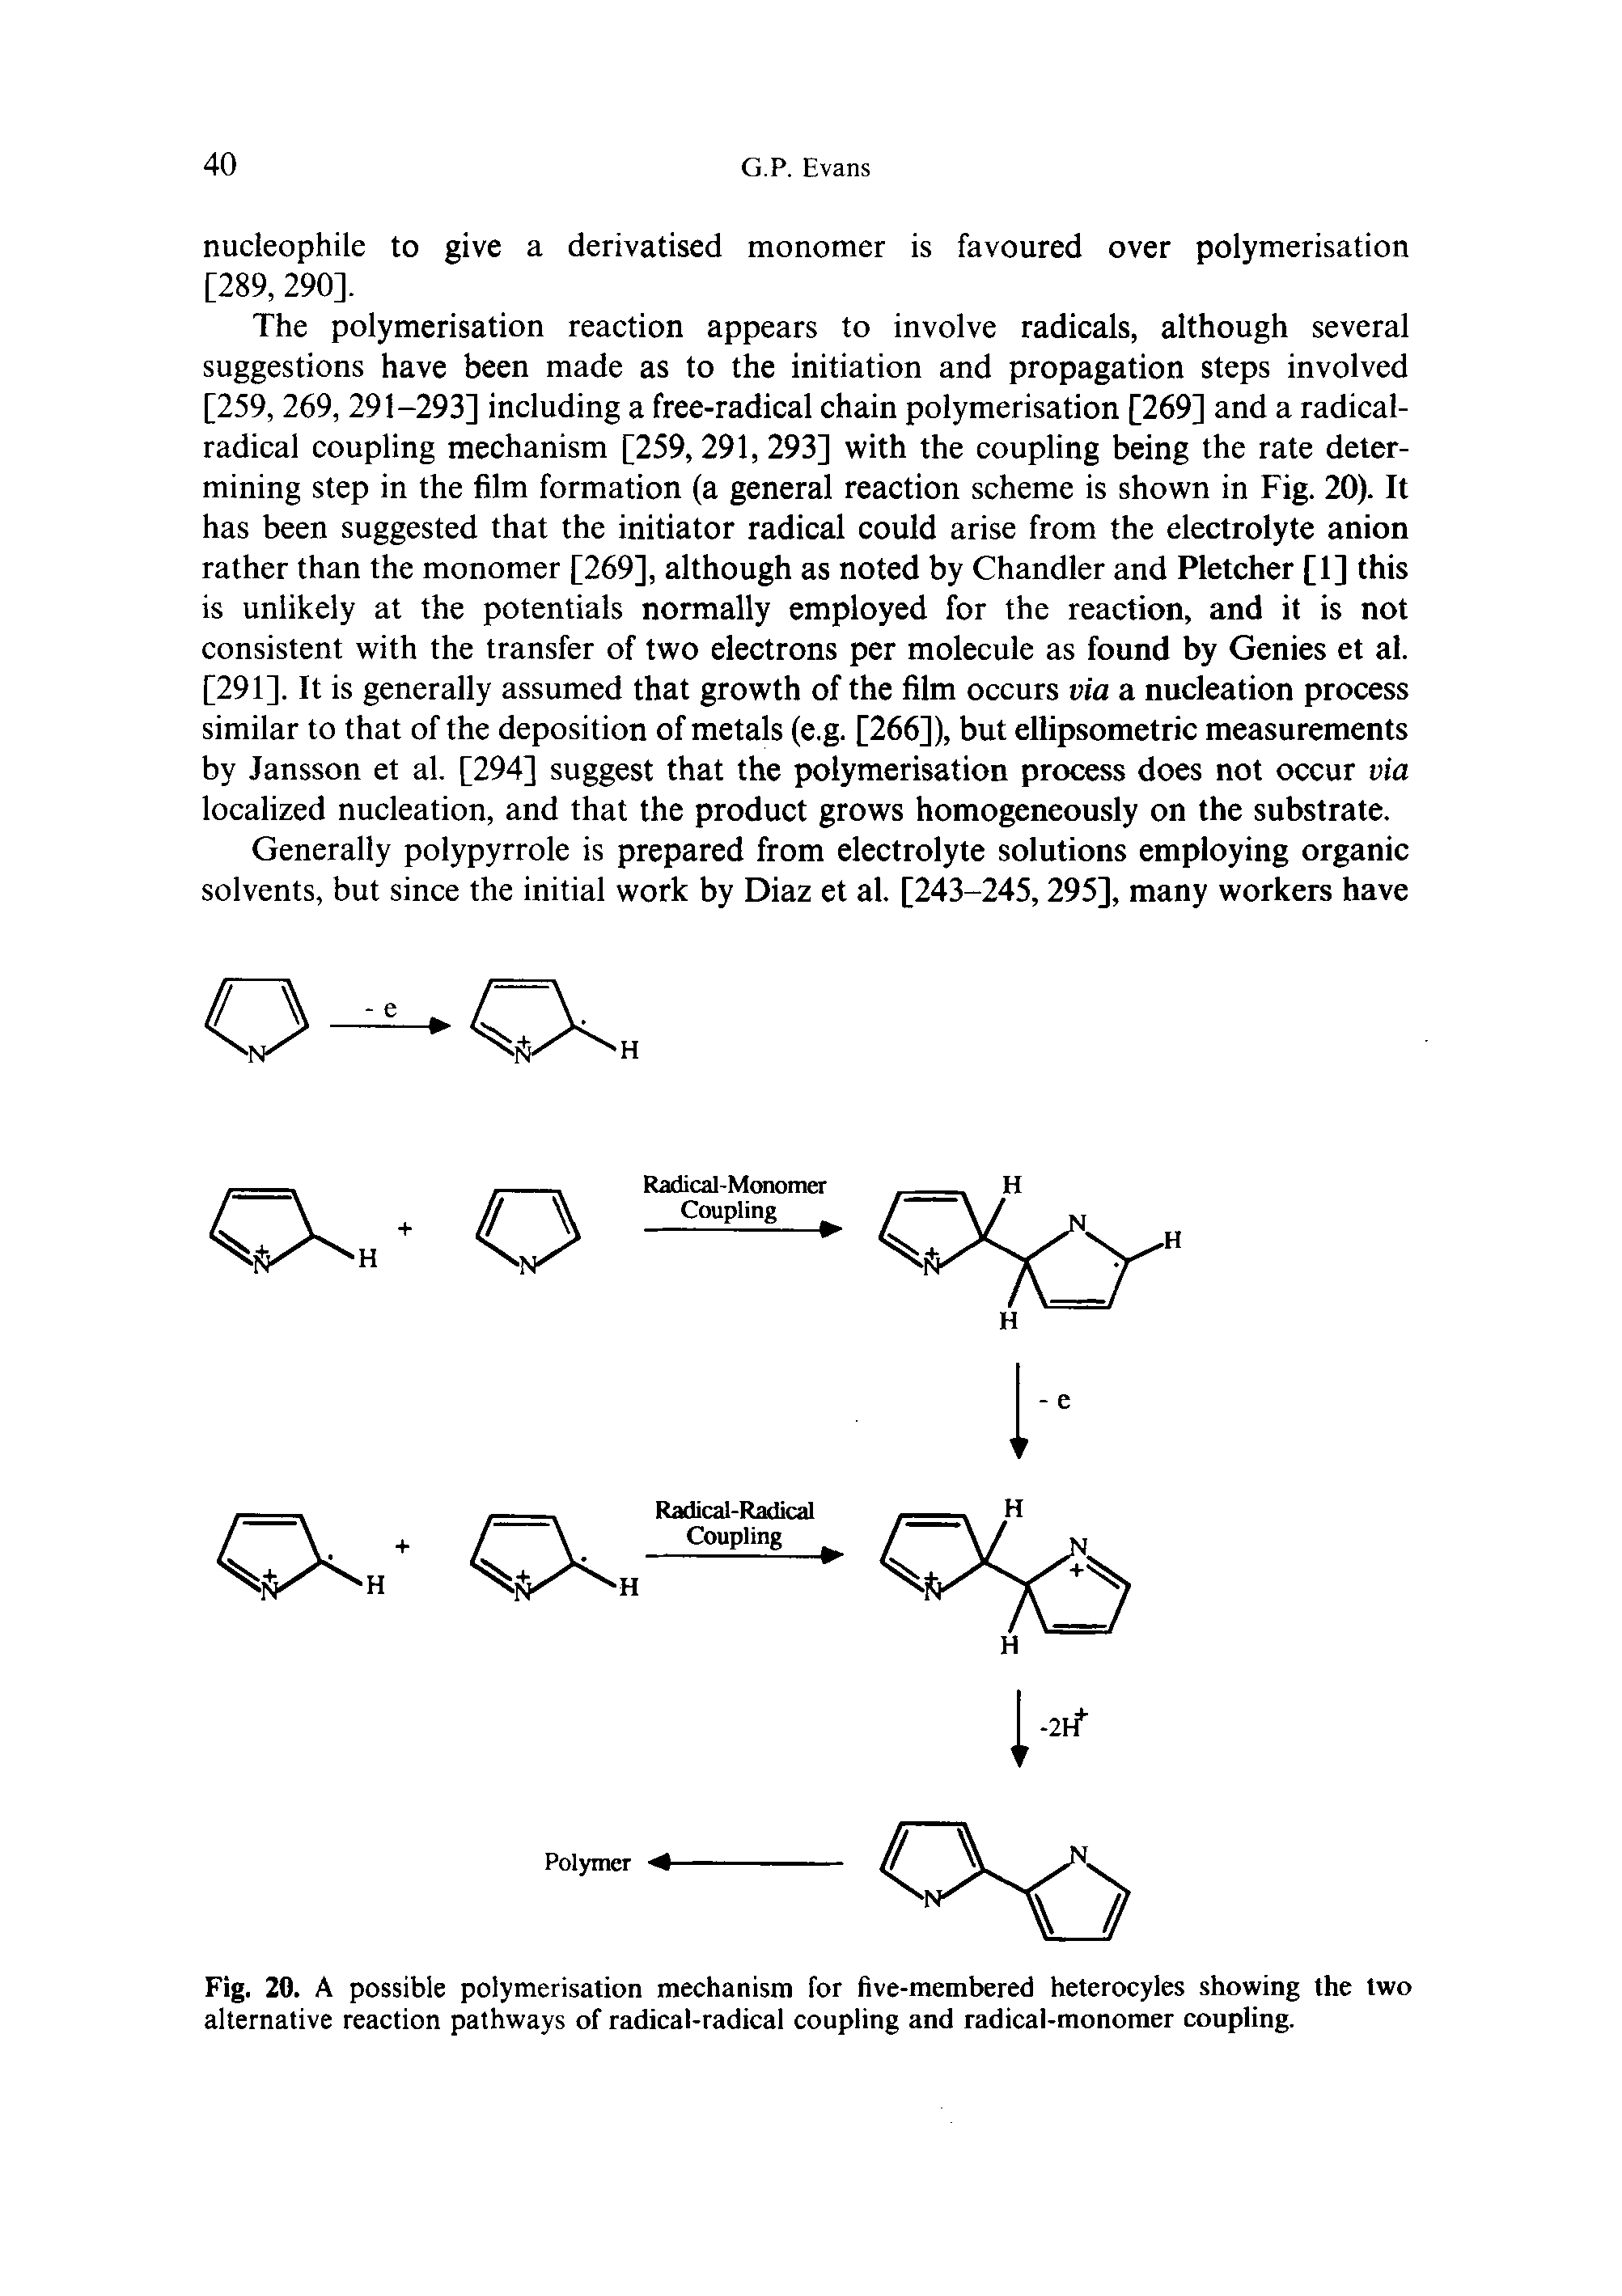 Fig. 20. A possible polymerisation mechanism for five-membered heterocyles showing the two alternative reaction pathways of radical-radical coupling and radical-monomer coupling.